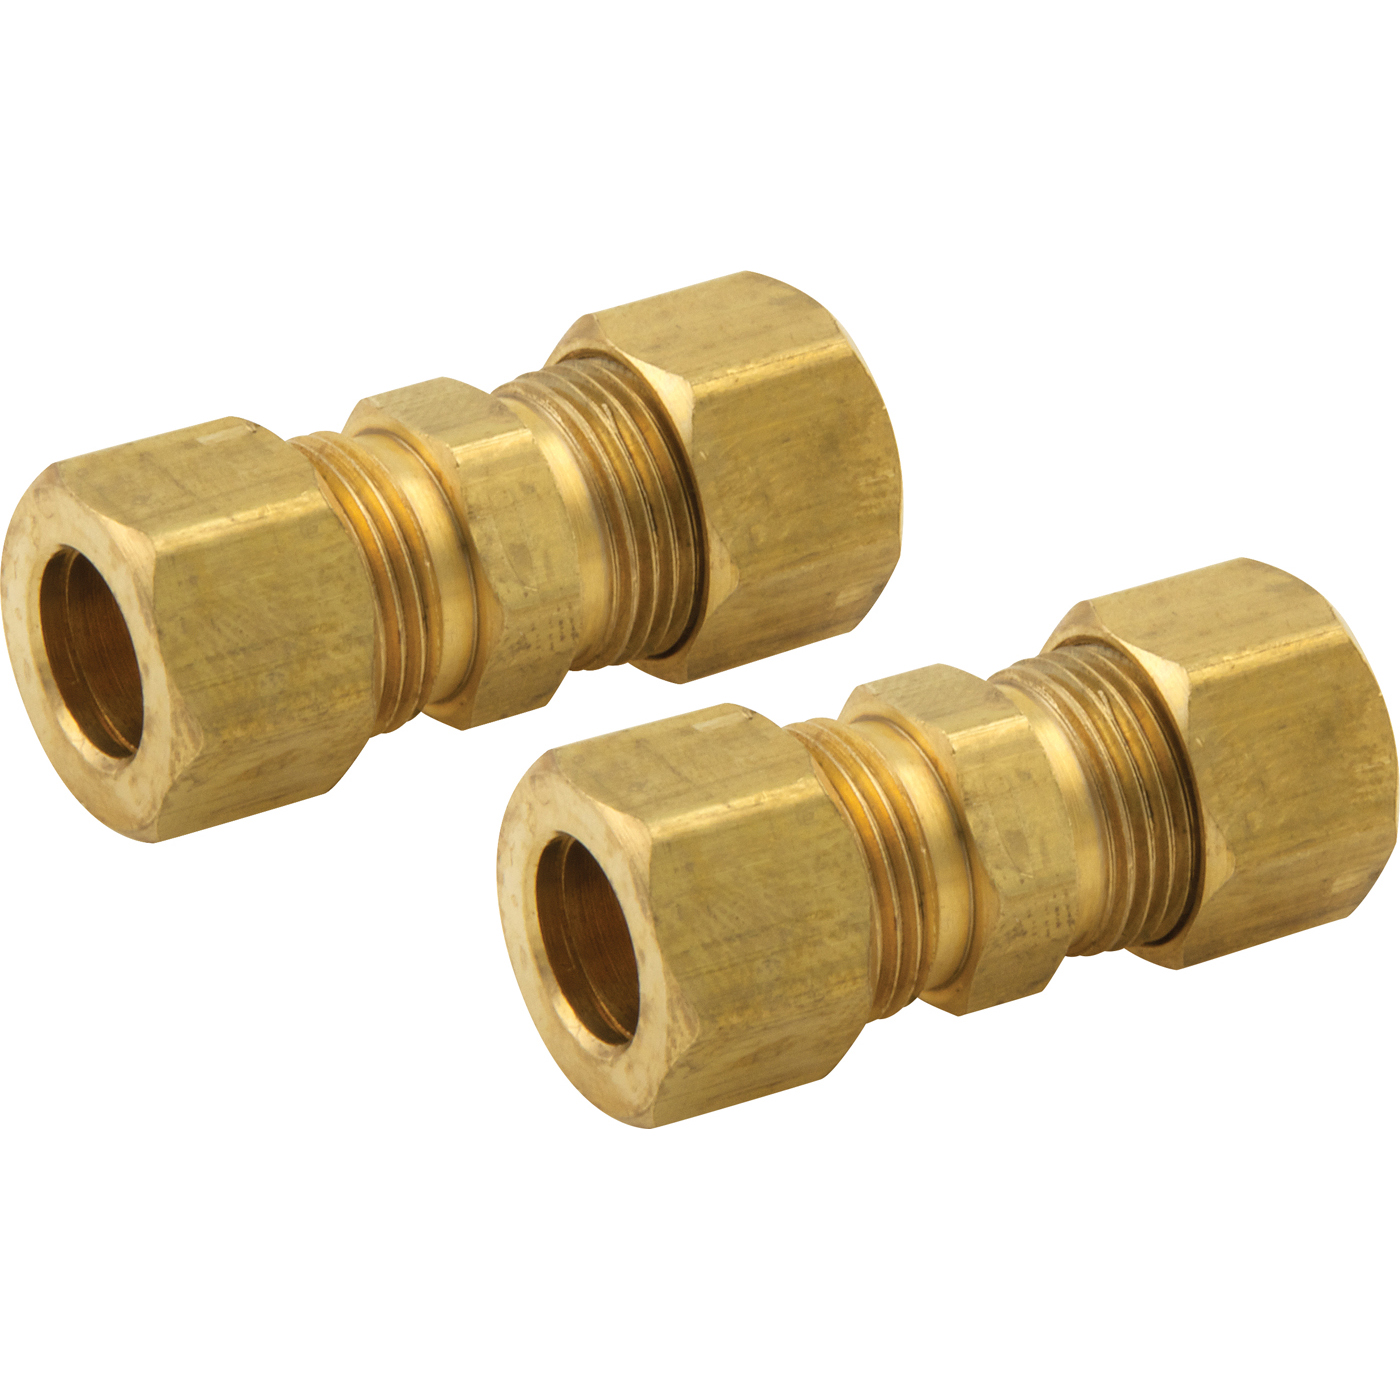 0124 06 00 - Complementary Brass Fittings, Reducers, Olives and Nuts